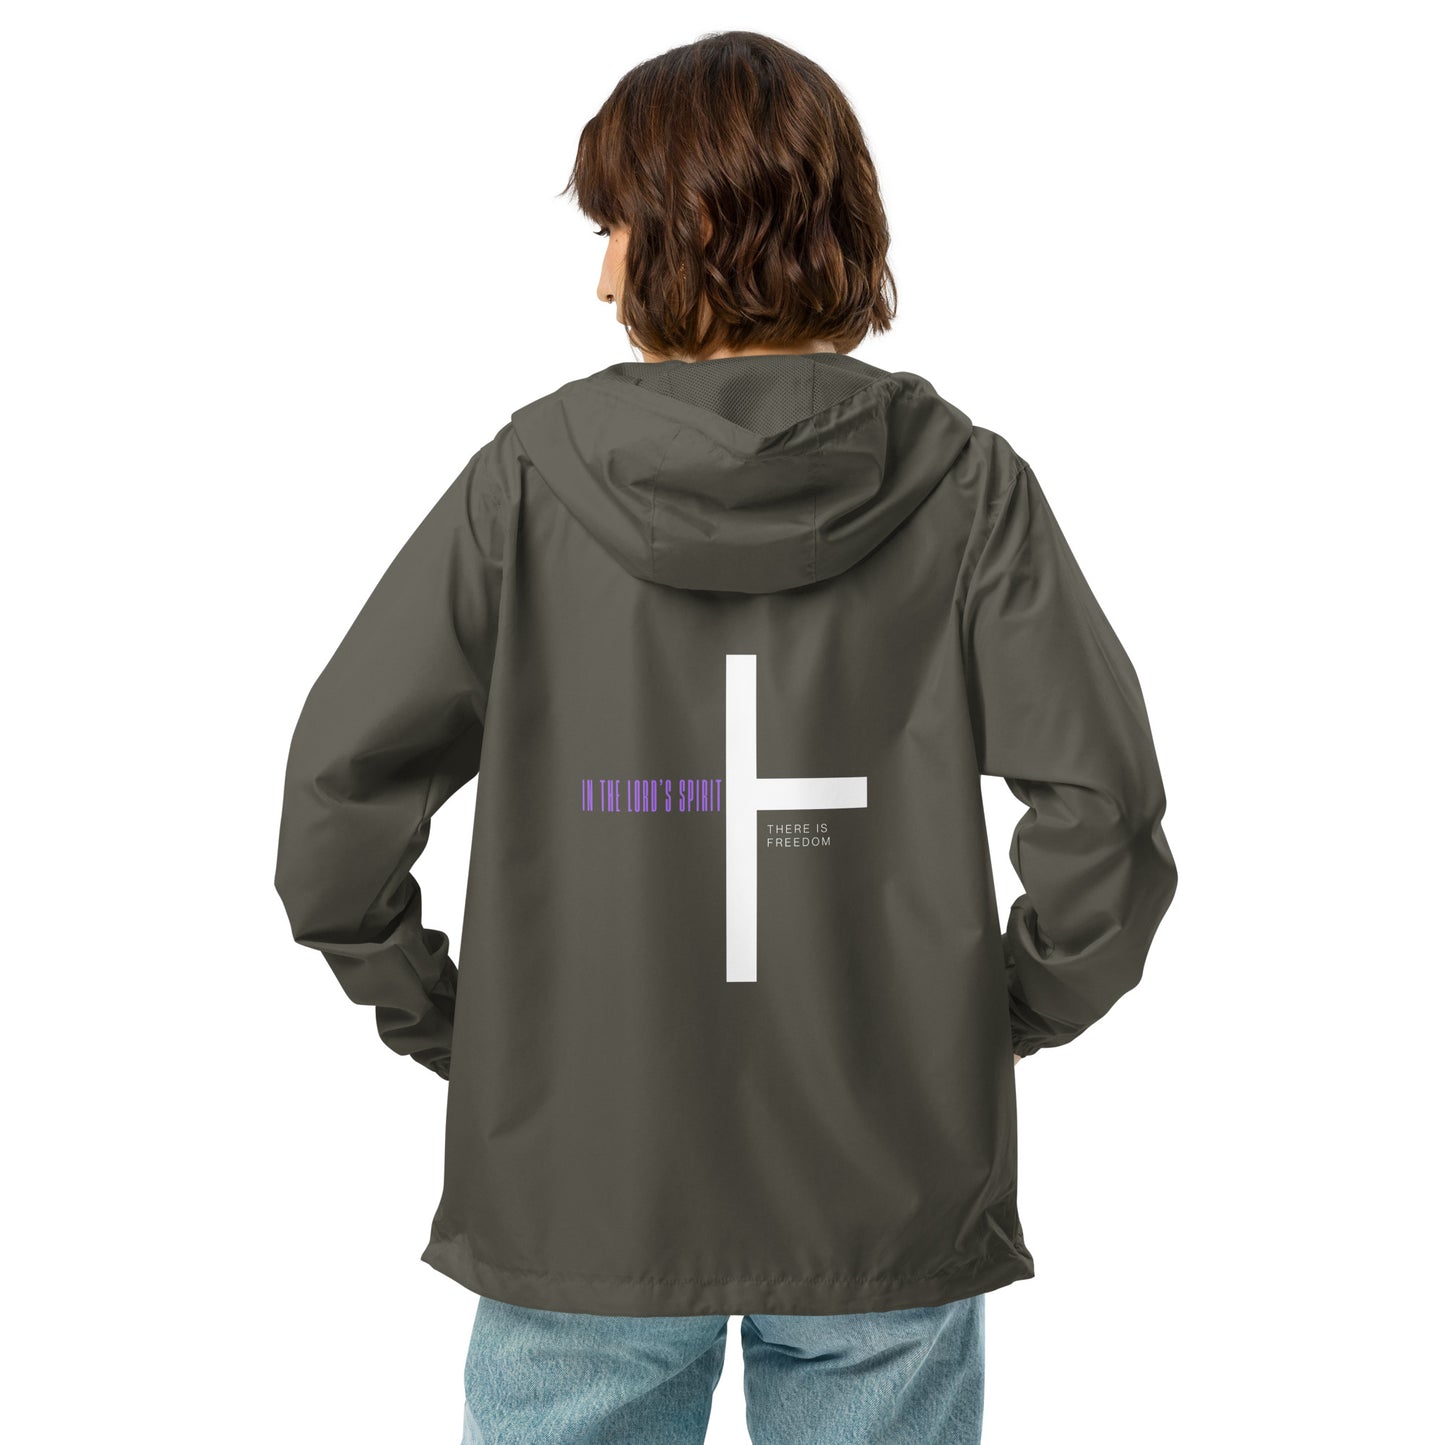 In The Lord Spirit There is Freedom Unisex Windbreaker